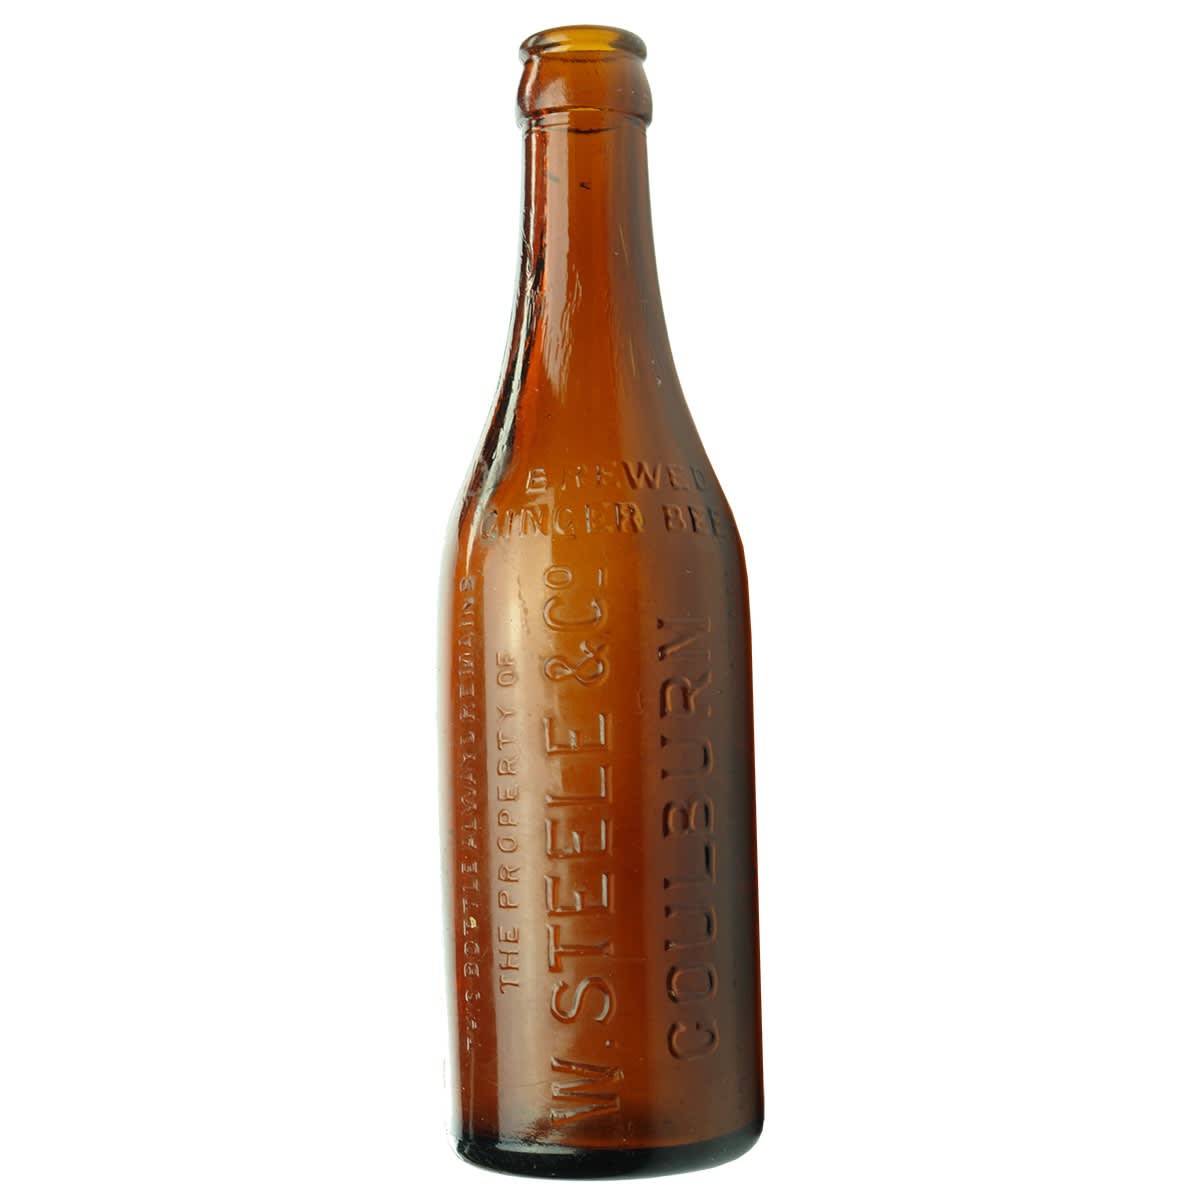 Ginger Beer. W. Steele & Co., Goulburn. Amber. 10 oz. (New South Wales)